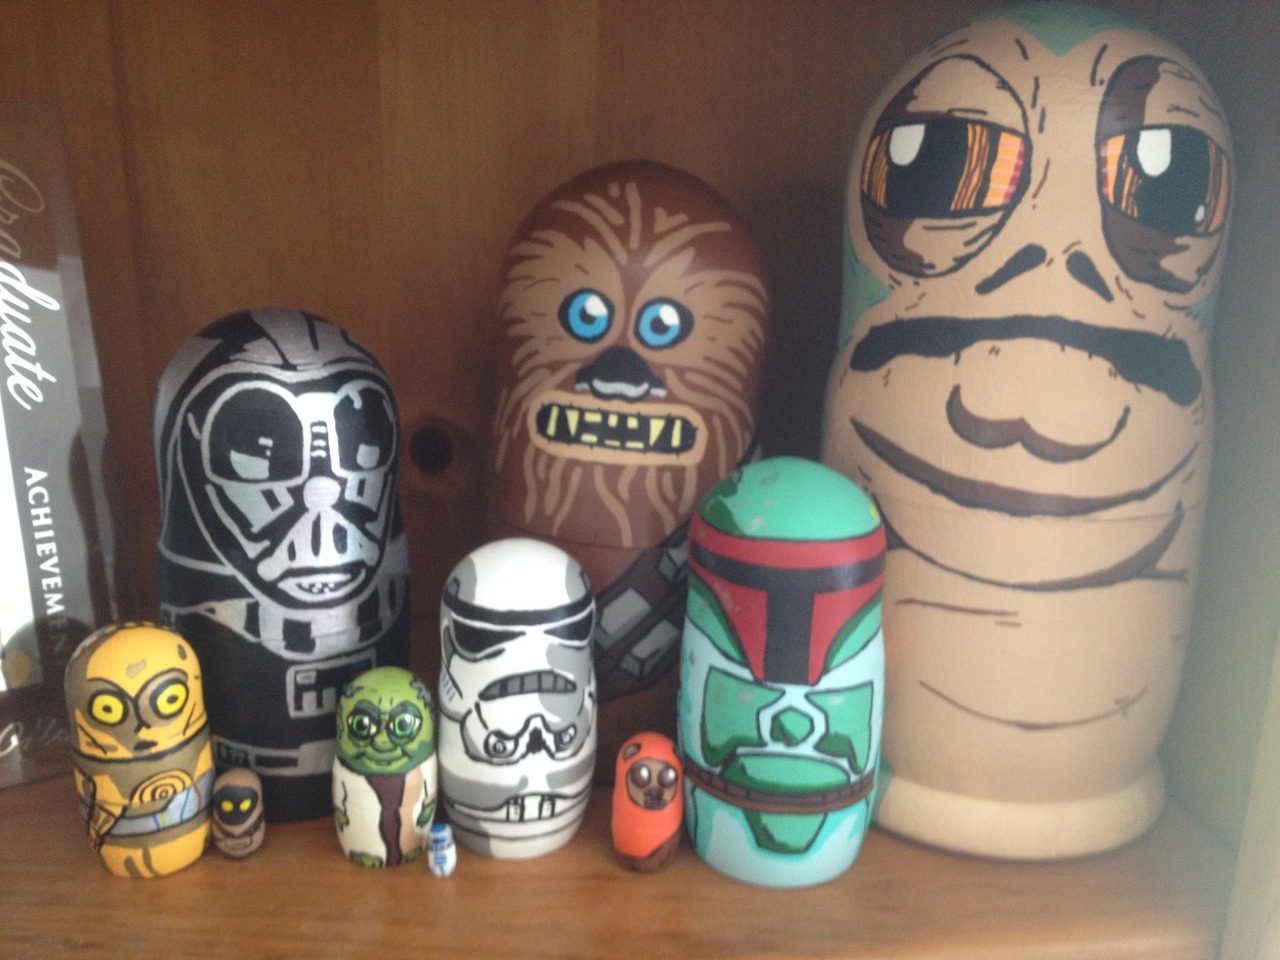 I&rsquo;ve always had a fascination with nesting dolls, also known as stacking dolls or, originally, Matryoshka dolls. For a show that I had coming up, I decided to experiment and test the crowd&rsquo;s reaction to my own personalized dolls.For this one, I used my favorite Star Wars characters. They seemed to be a hit, so I might start selling these and taking commissions for other sets. Maybe my next project will be Jim Henson&rsquo;s Labyrinth?Challenge! Can you name them all? www.alexwalters.tumblr.com